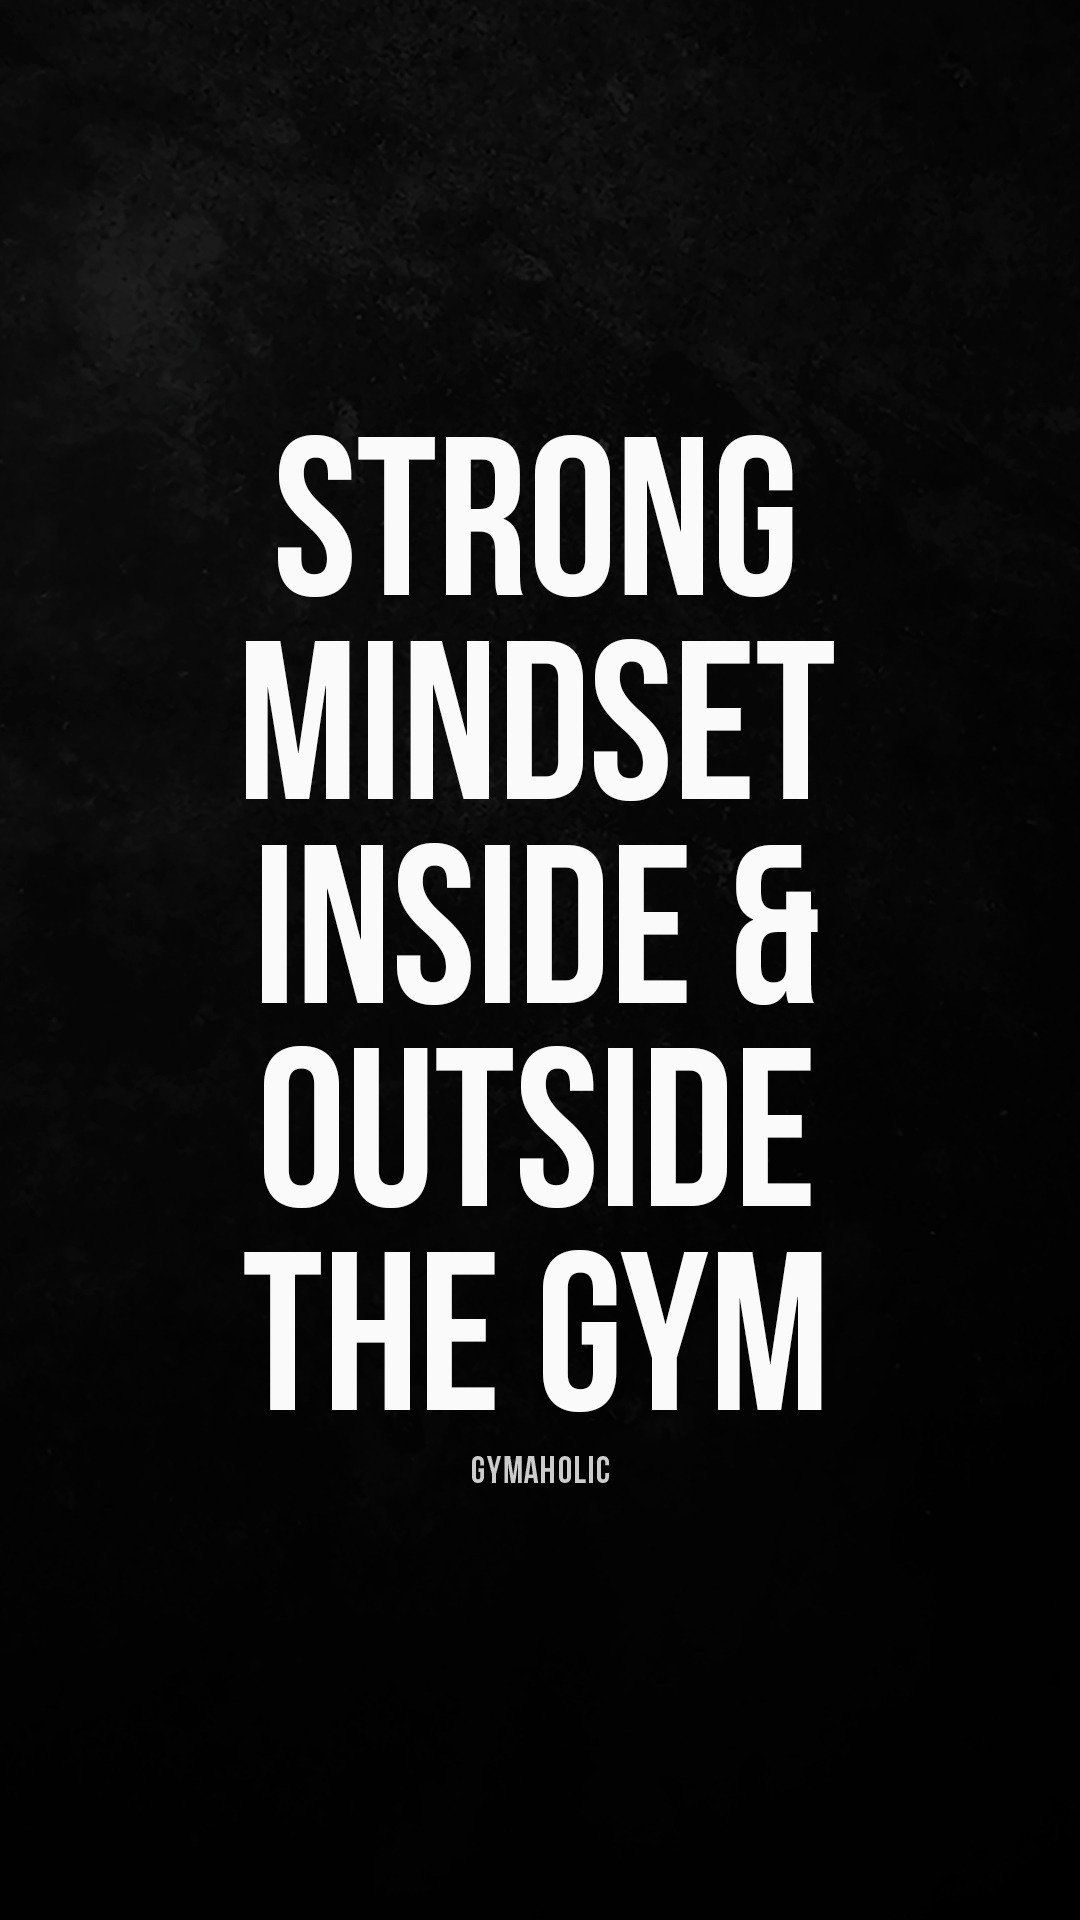 Strong mindset inside and outside the gym